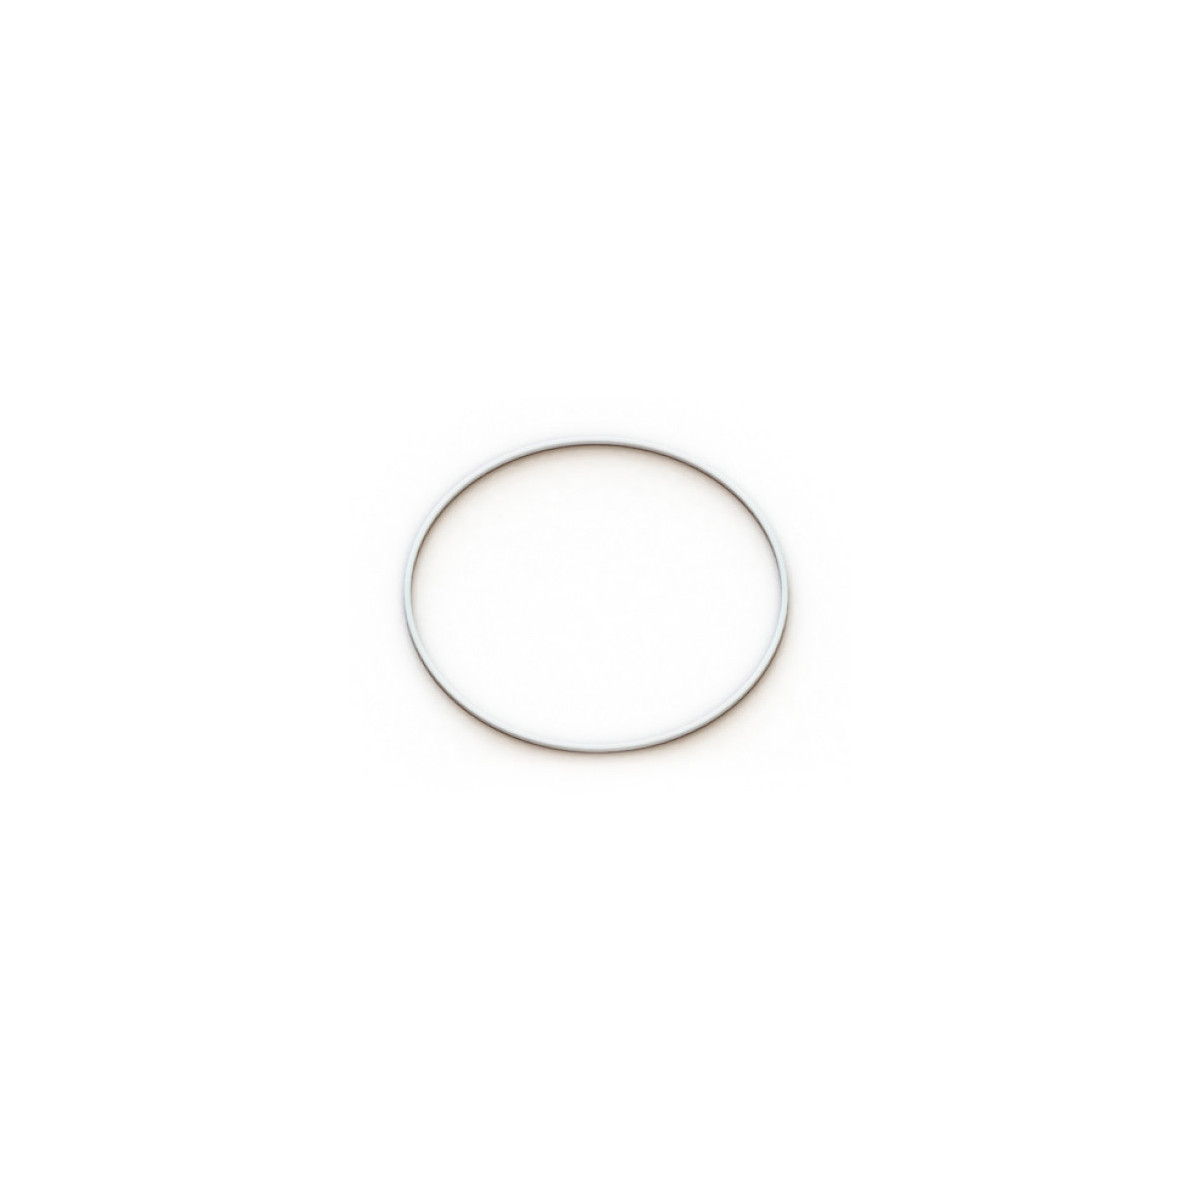 Grainfather silicon seal for top and bottom plate